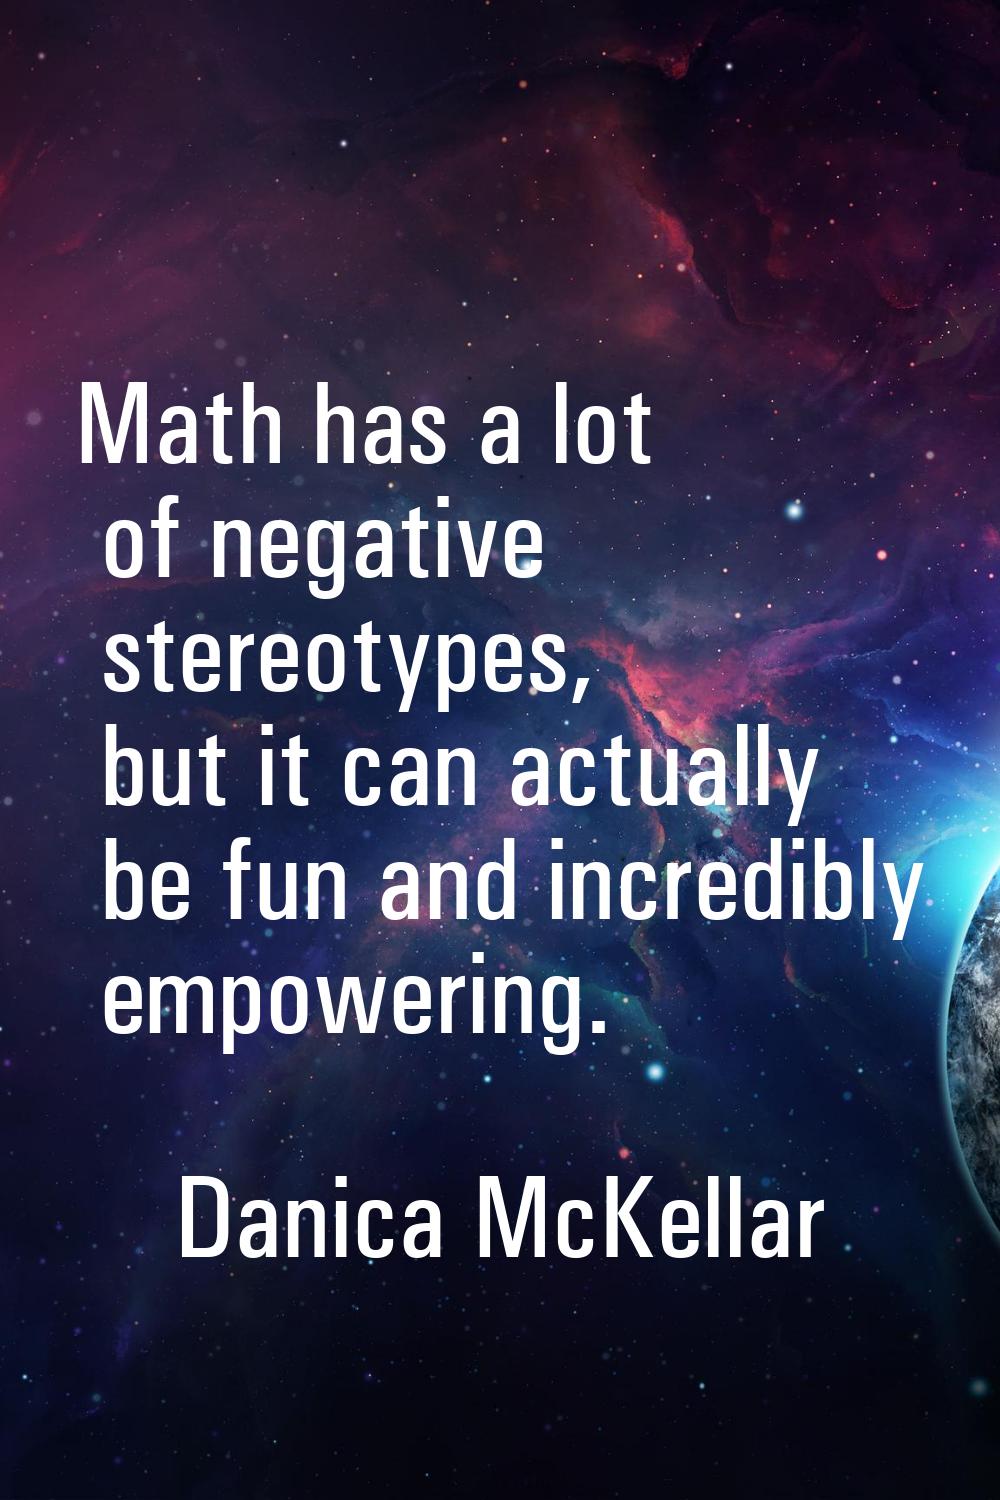 Math has a lot of negative stereotypes, but it can actually be fun and incredibly empowering.